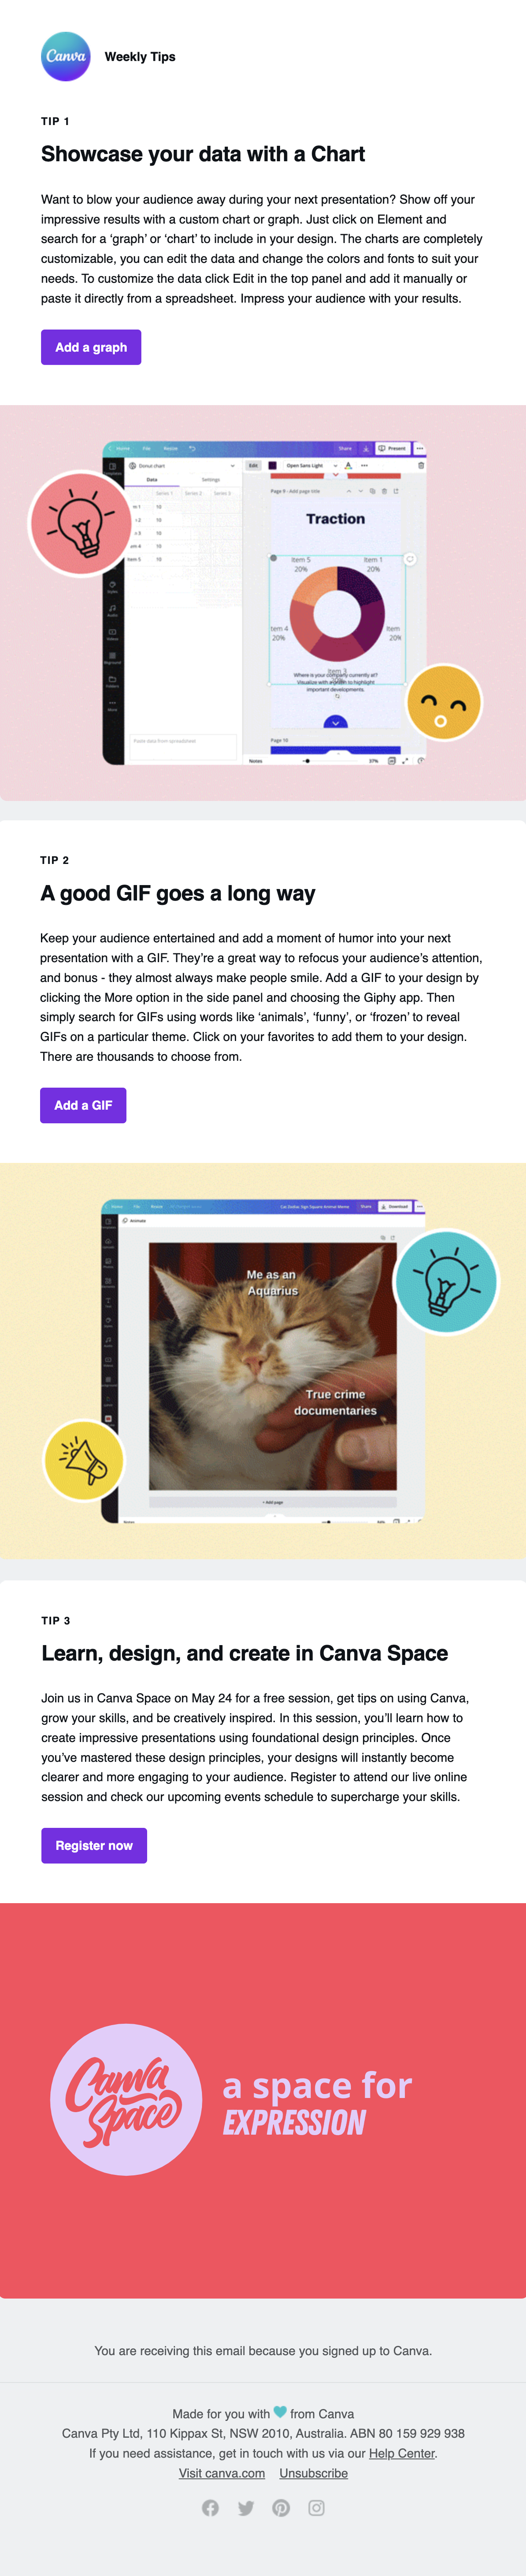 GIFs in SaaS Emails: Screenshot of Canva's product tips email